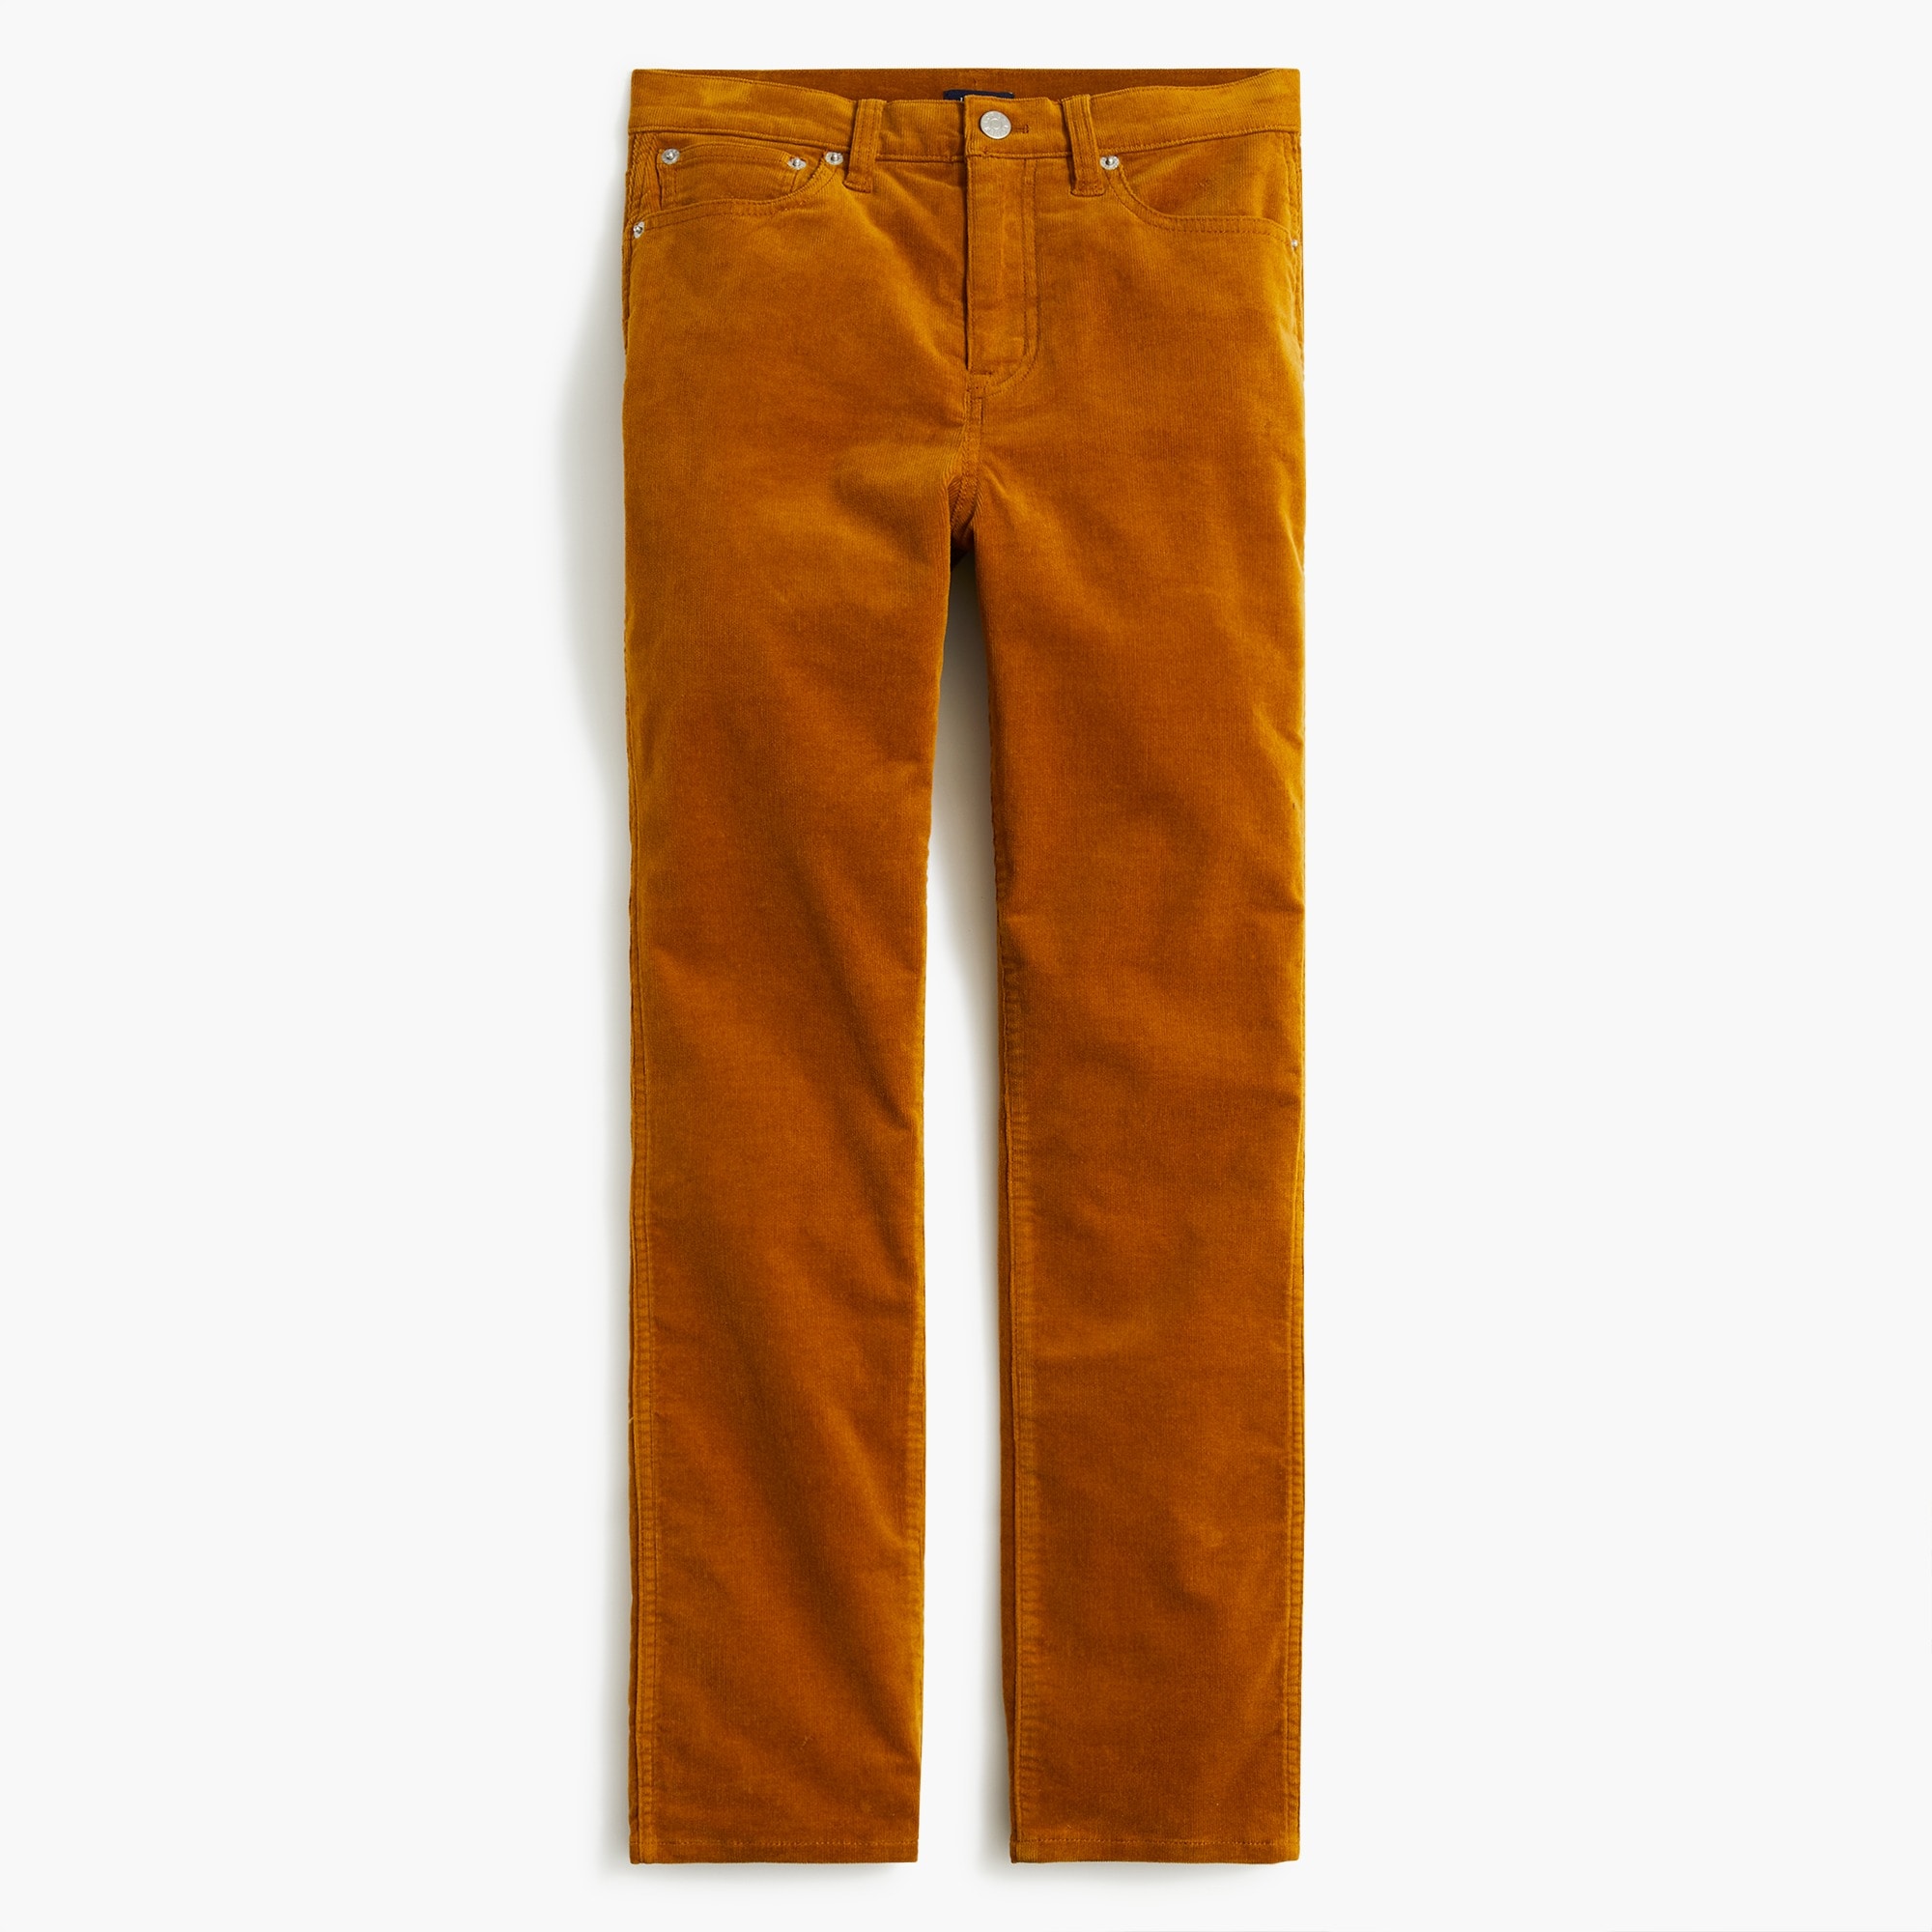 Most Colourful Corduroy Pants: J.Crew Vintage Corduroy Straight Pant, 13  Corduroy Pants Our Editors Are Loving For Fall